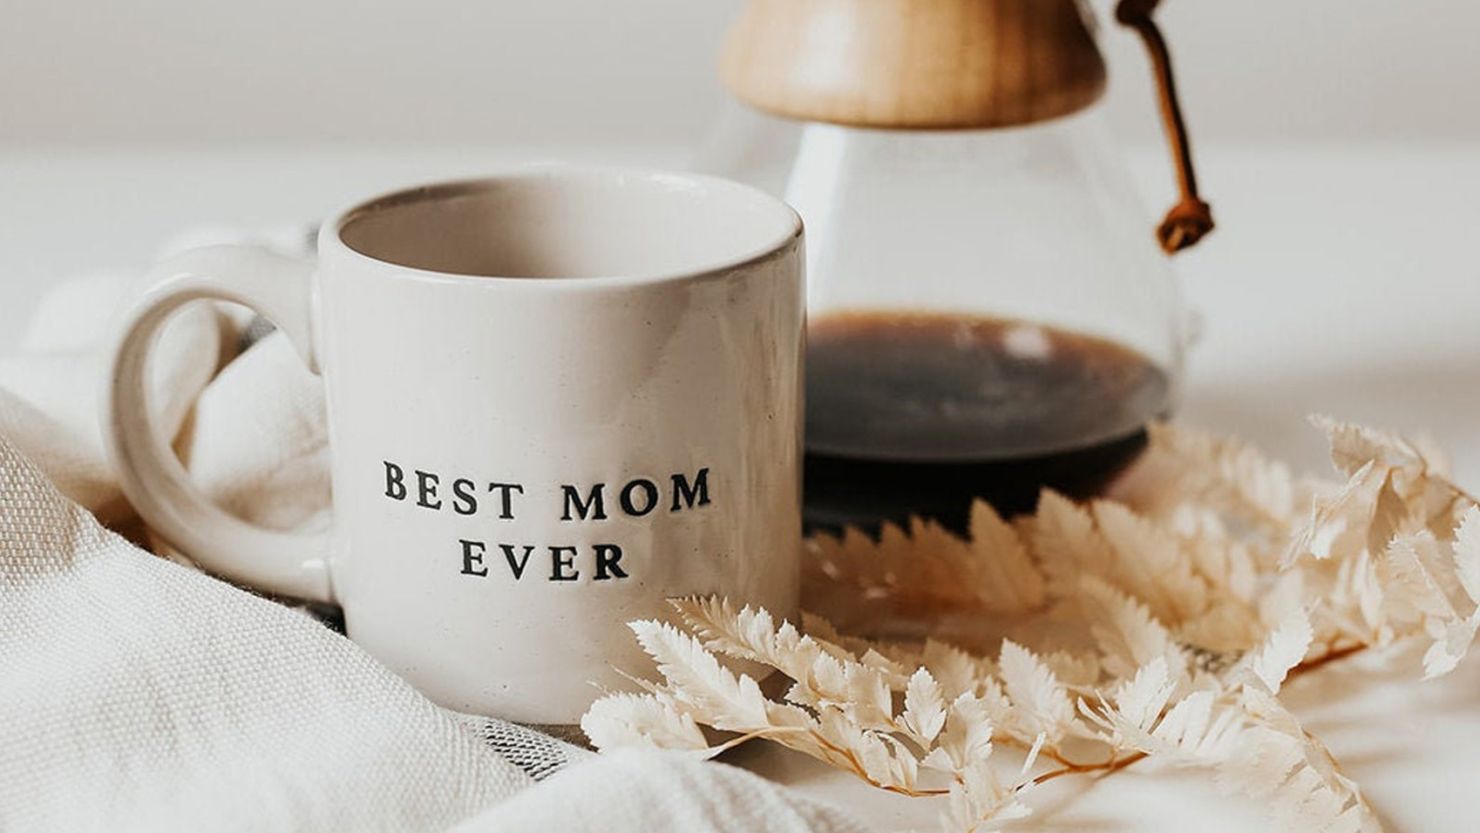 15 of the Best Kitchen Gifts for Mom (That Will Make Her Happy